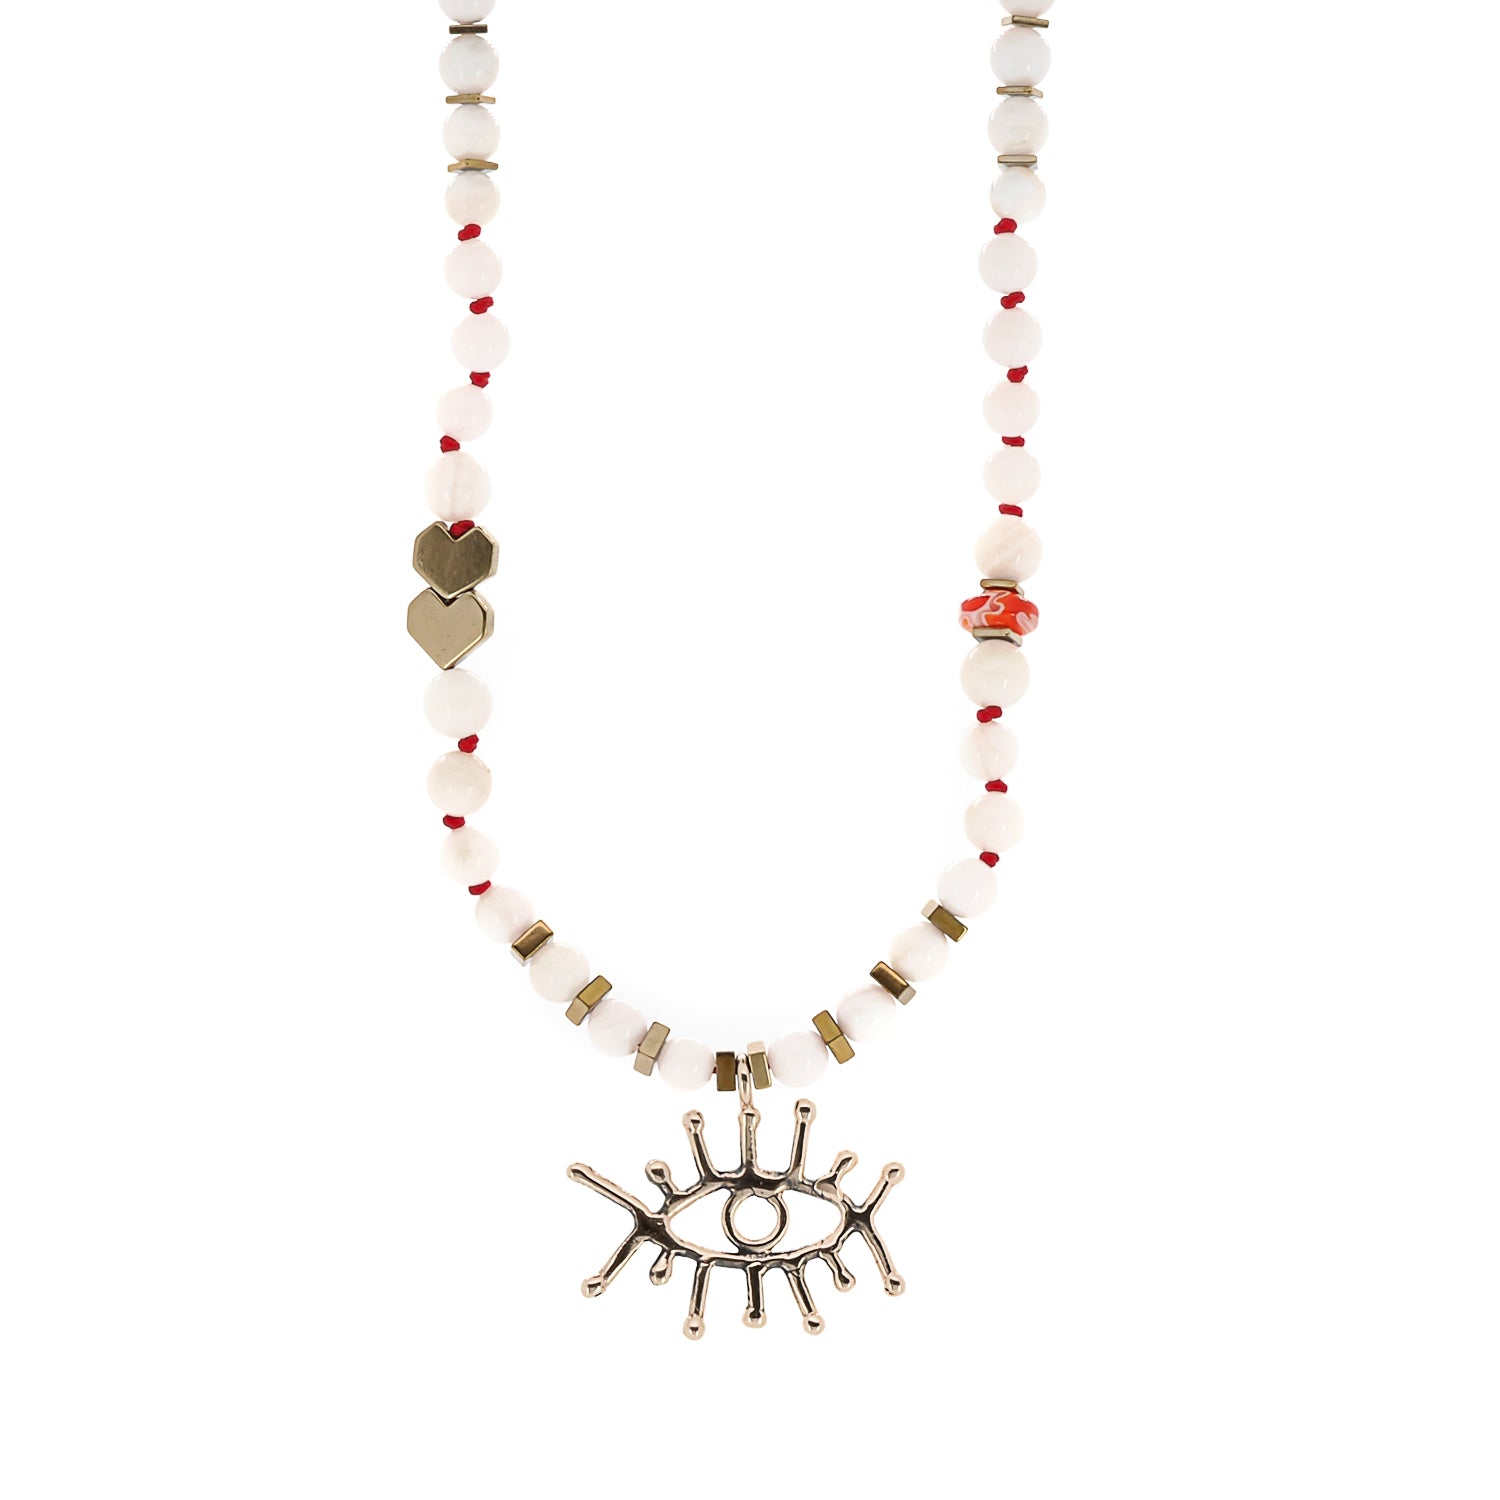 Experience the captivating beauty of the Love Guardian Choker Necklace, featuring a bronze evil eye pendant and gold-colored hematite heart beads.